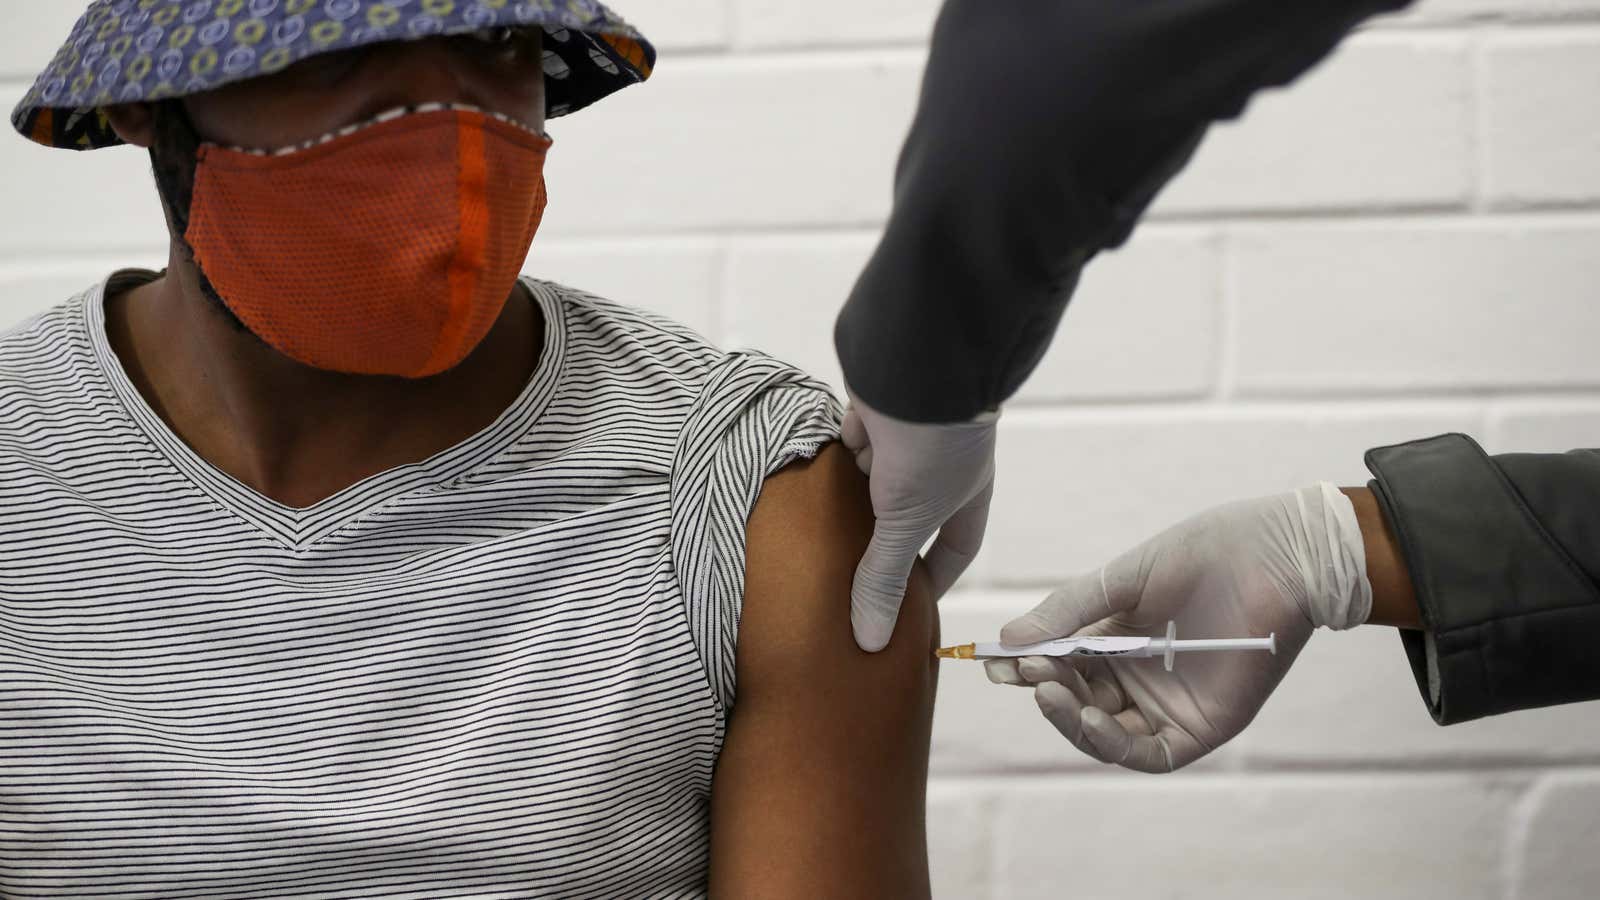 A volunteer receives an injection during the South Africa first human clinical trial for a potential vaccine against the novel coronavirus in Soweto, South Africa, June 24, 2020.